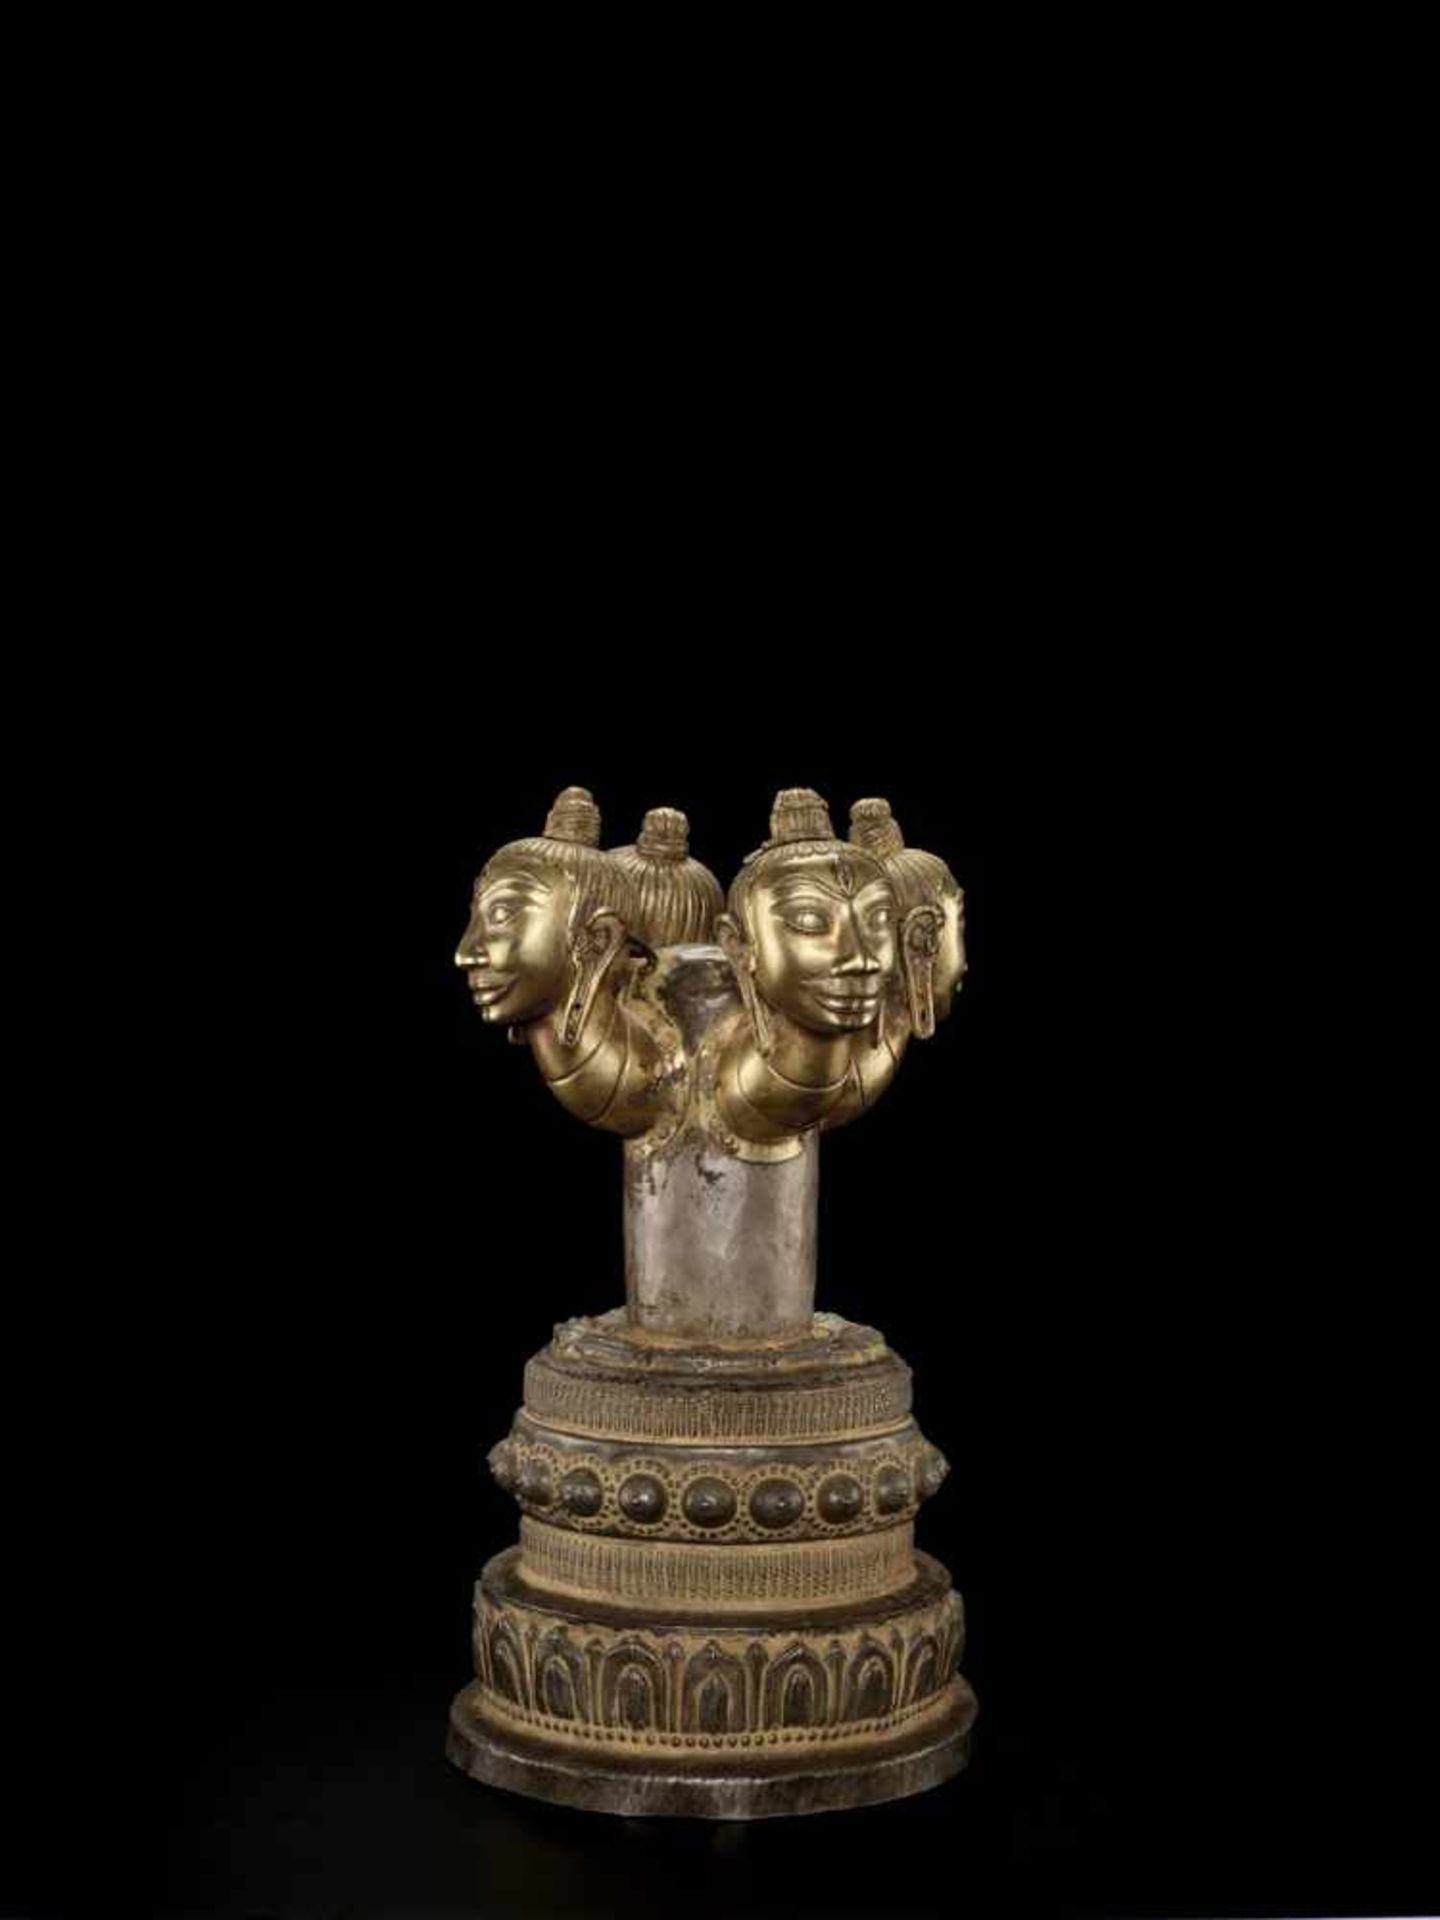 zurückgezogen / withdrawn---AN EXQUISITE AND EXCEPTIONALLY RARE CHAM LINGAM WITH FOUR GOLD SHIVA